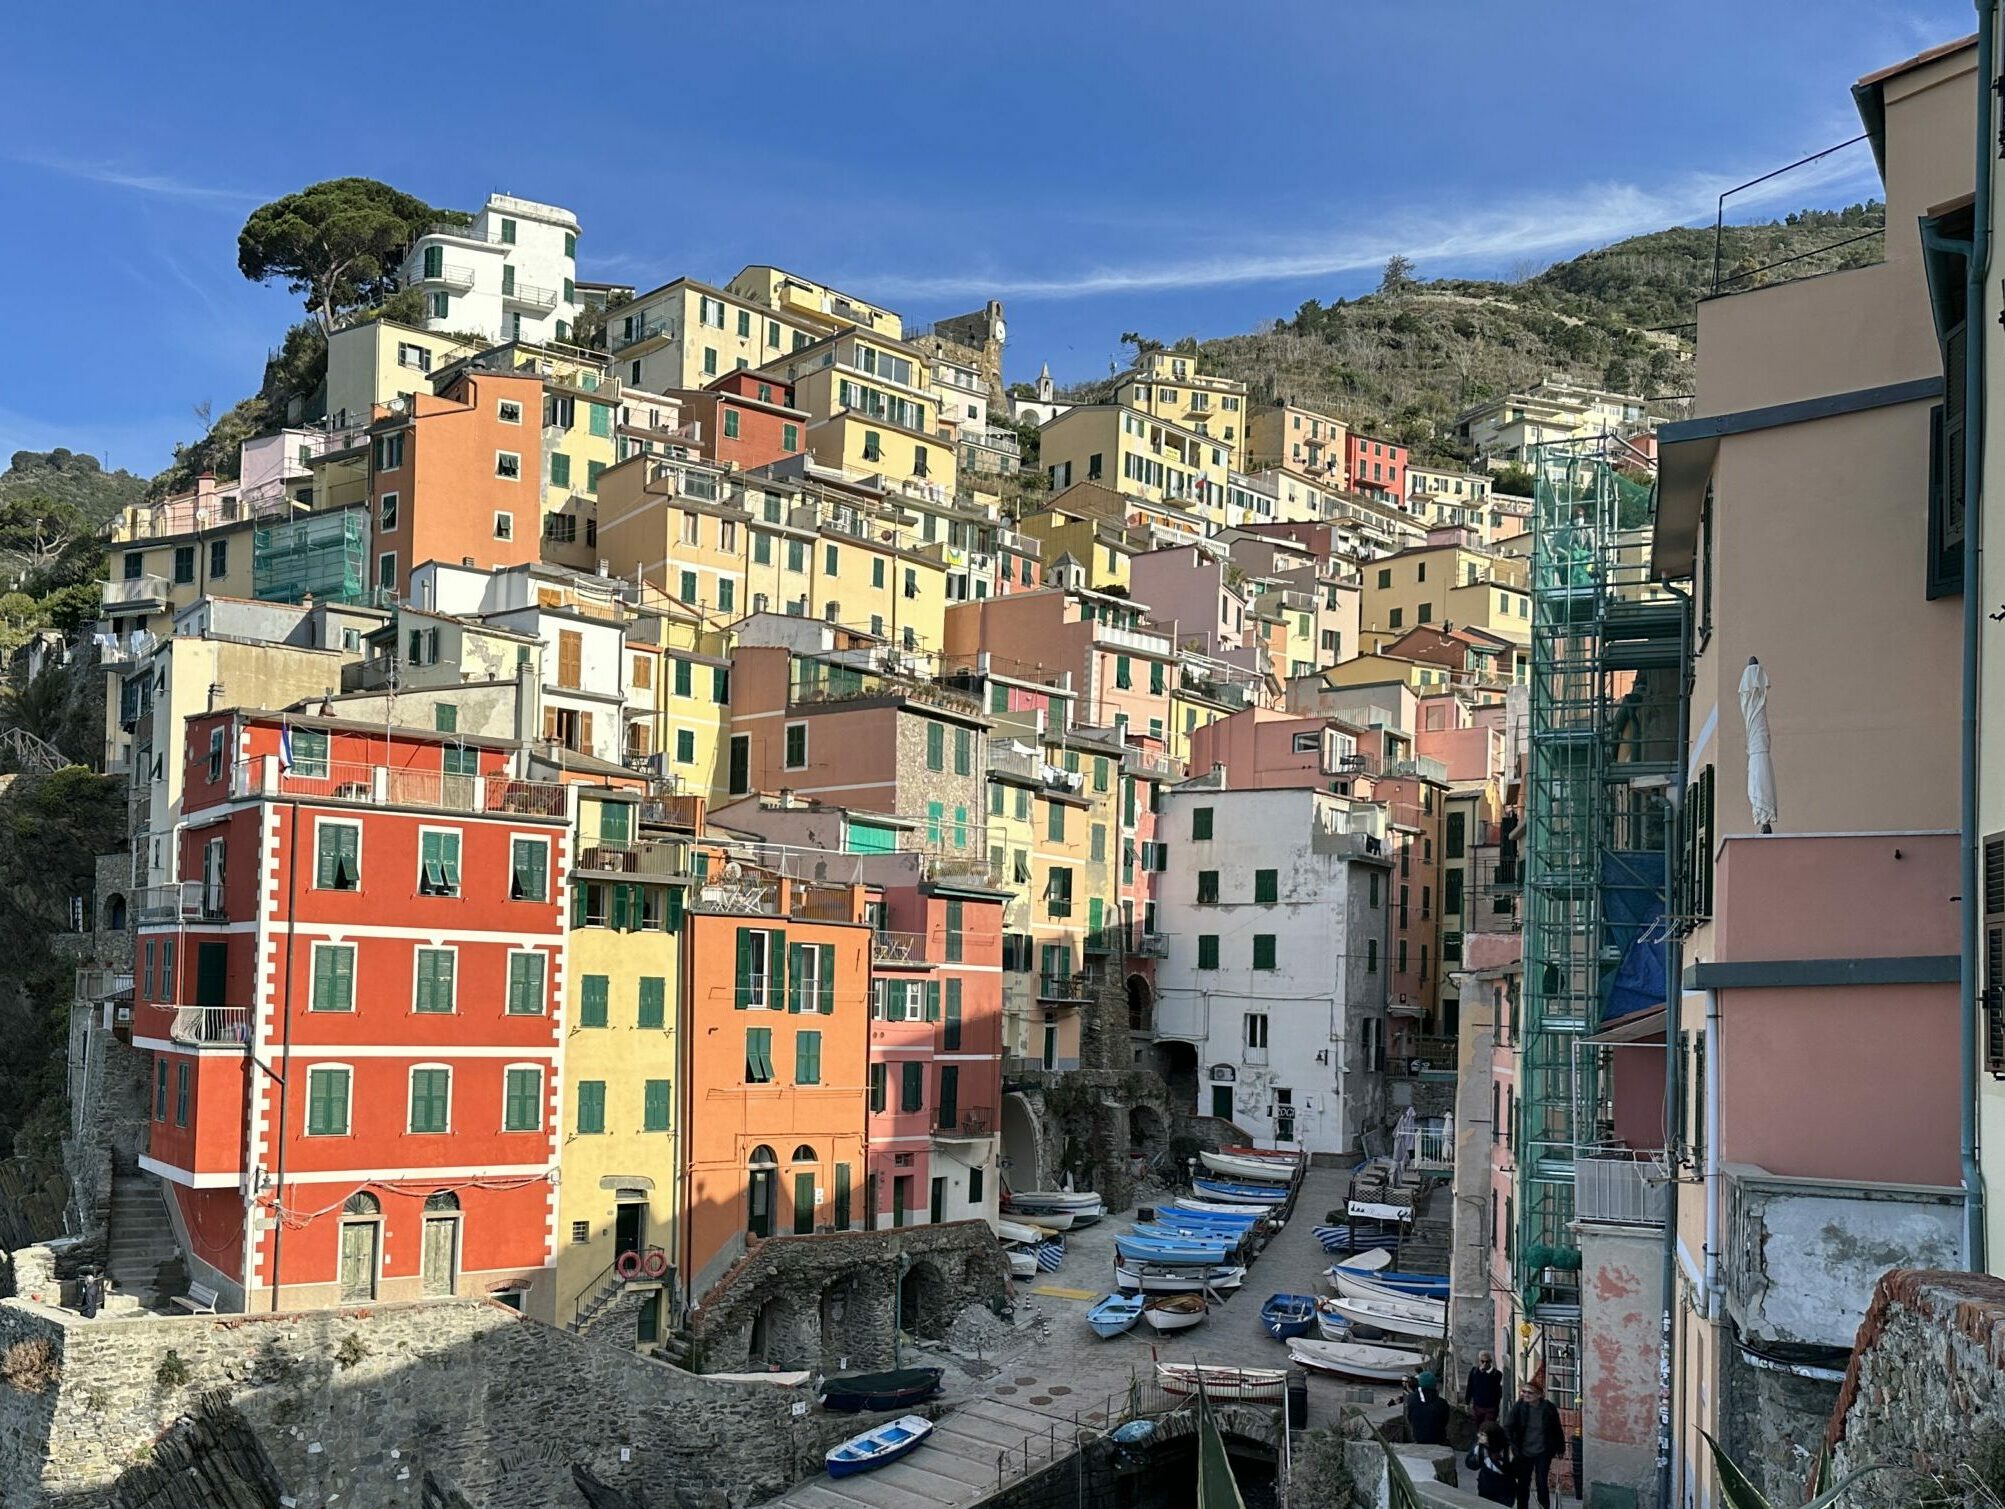 colorful buildings are built tightly together along a small harbor in Riomaggiore Italy